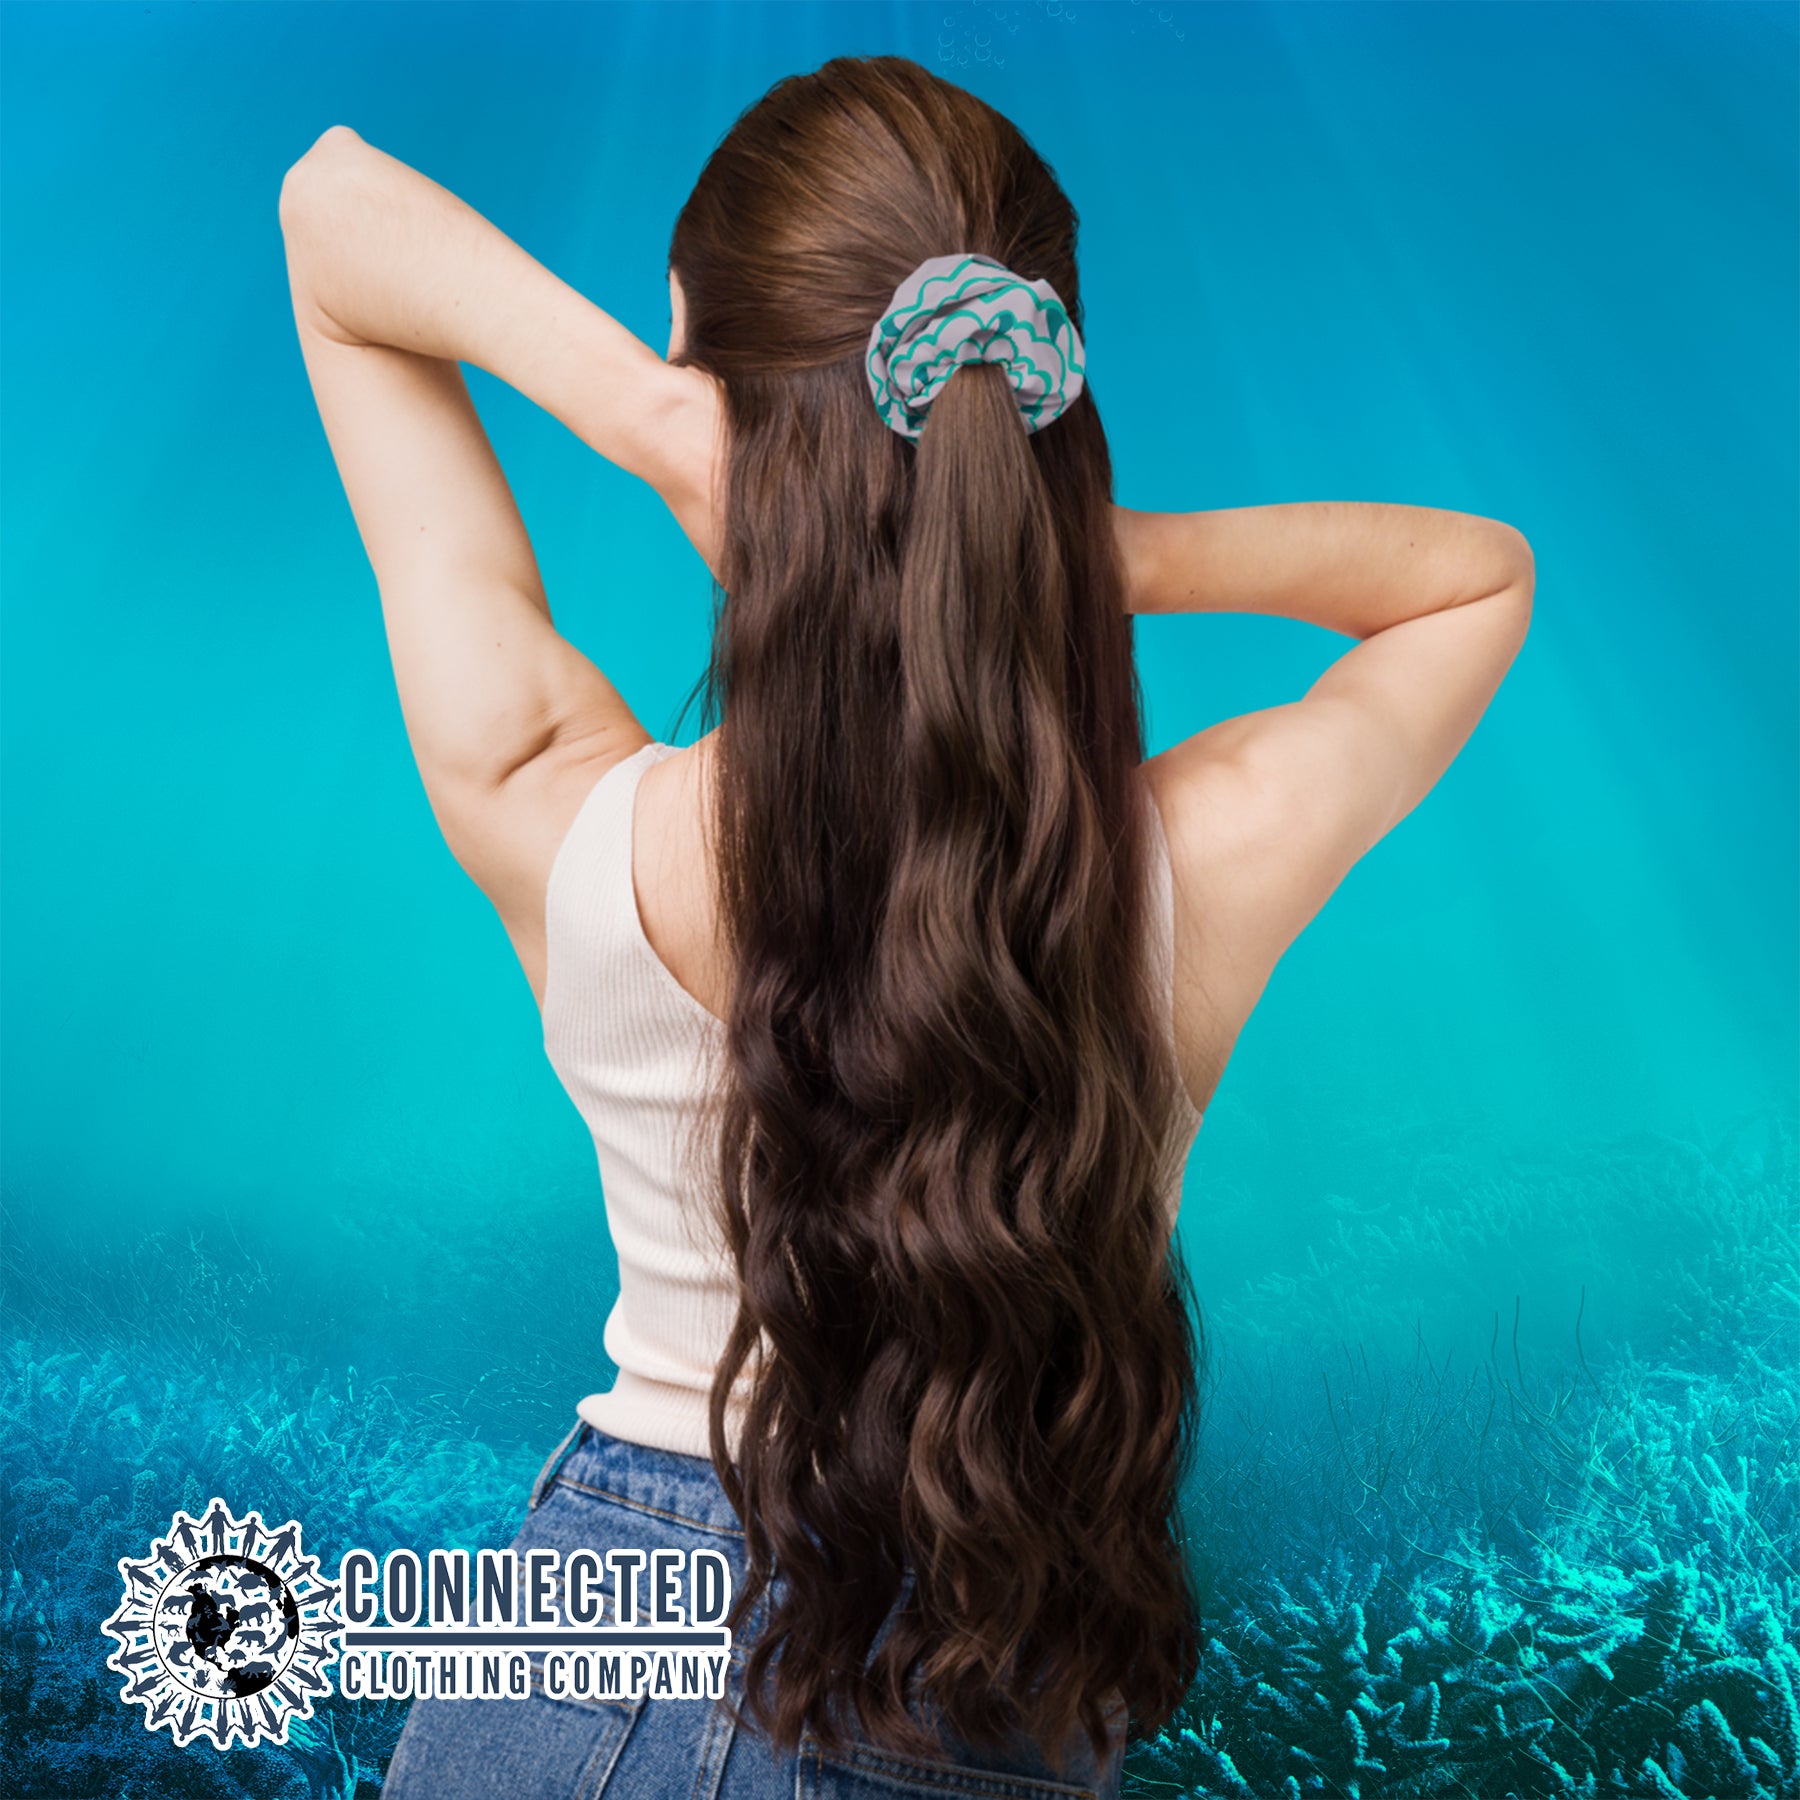 Model Wearing Shark Fin Scrunchie in Green Color - sweetsherriloudesigns - Ethical & Sustainable Apparel - 10% donated to save the sharks